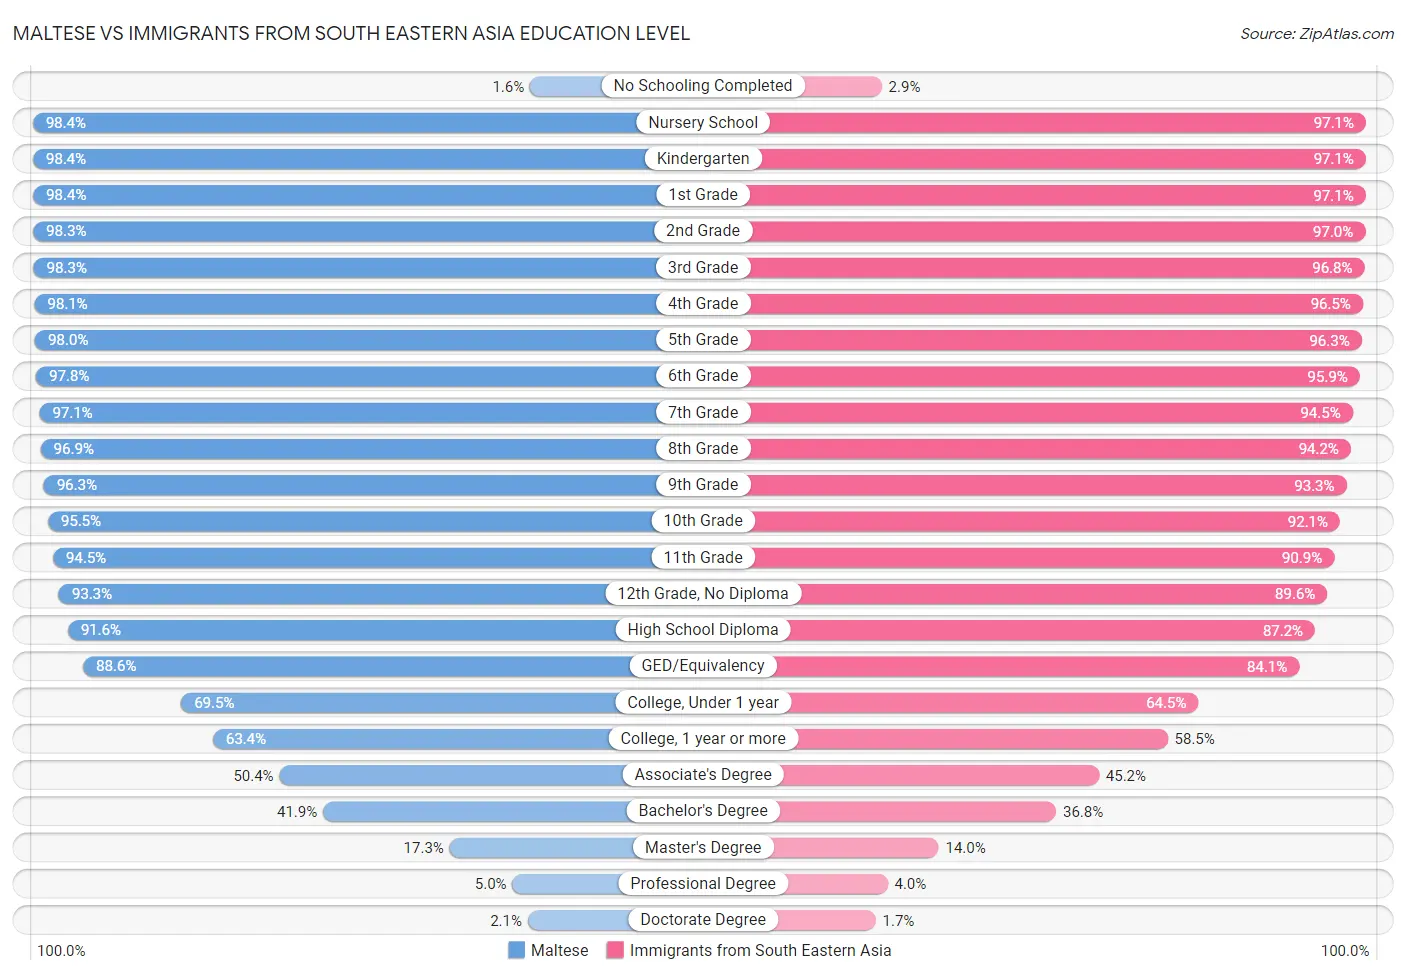 Maltese vs Immigrants from South Eastern Asia Education Level